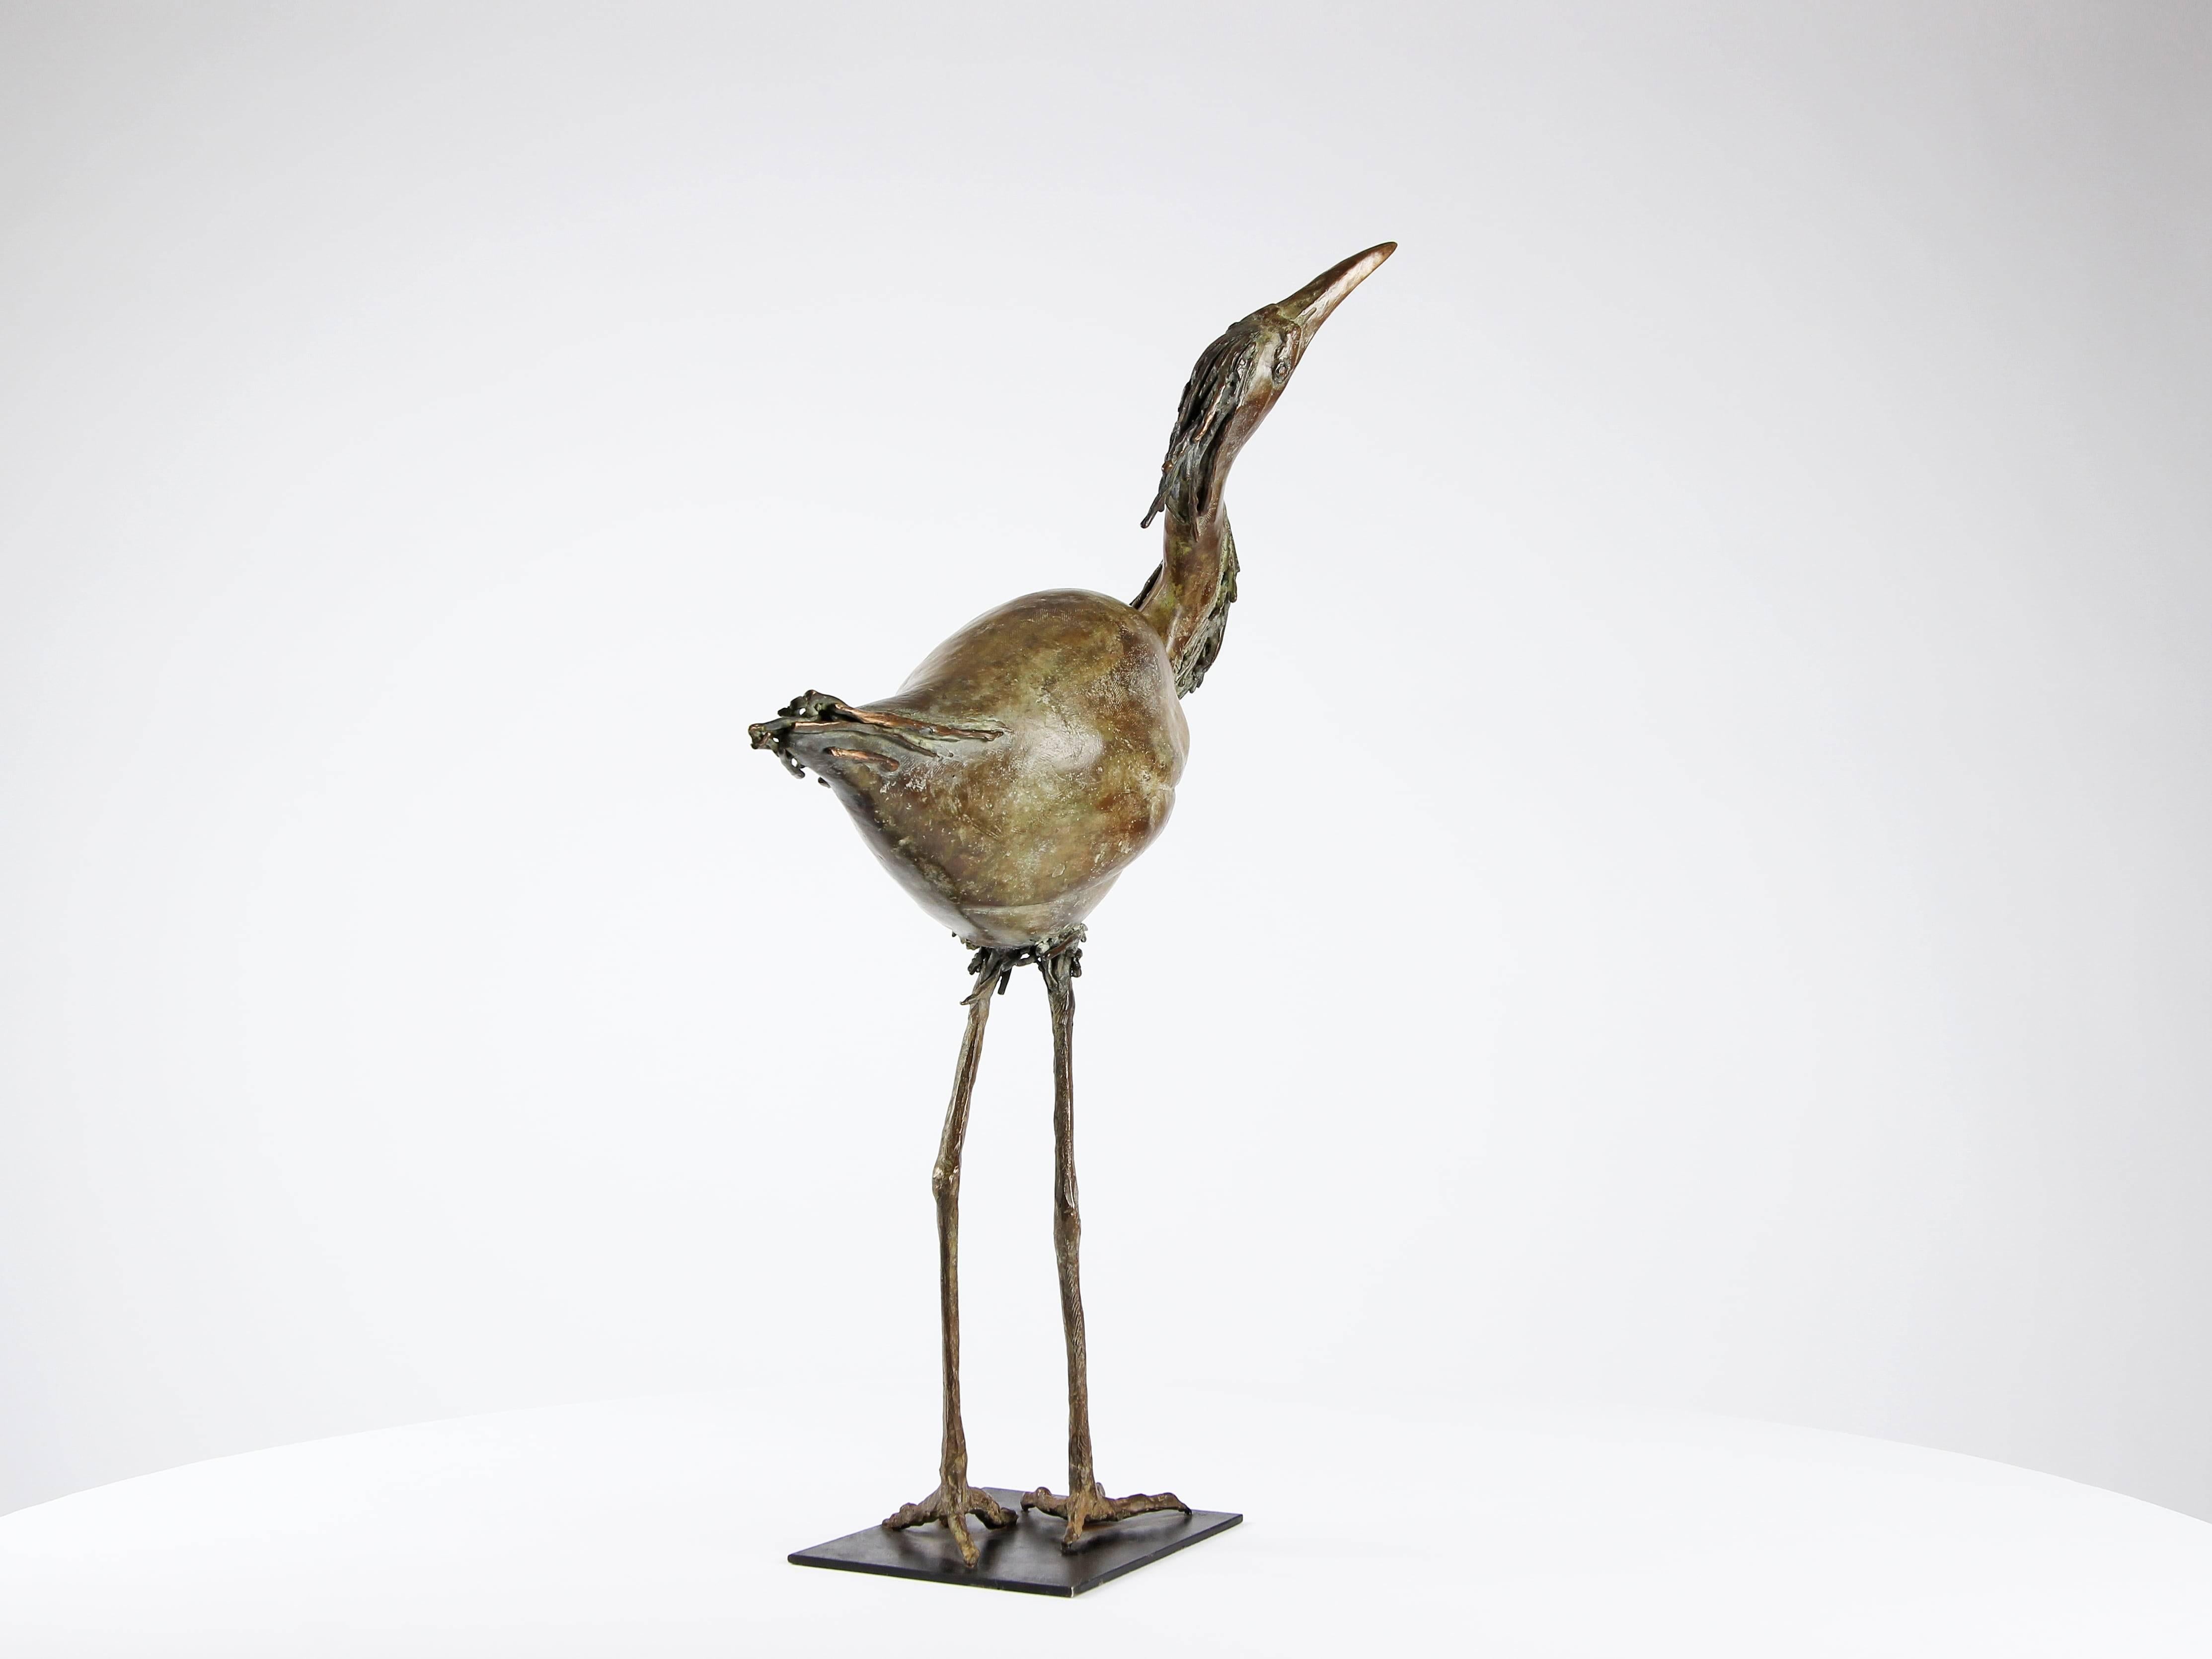 Egret by Chésade - Bronze animal sculpture of a bird, realistic, expressive For Sale 4